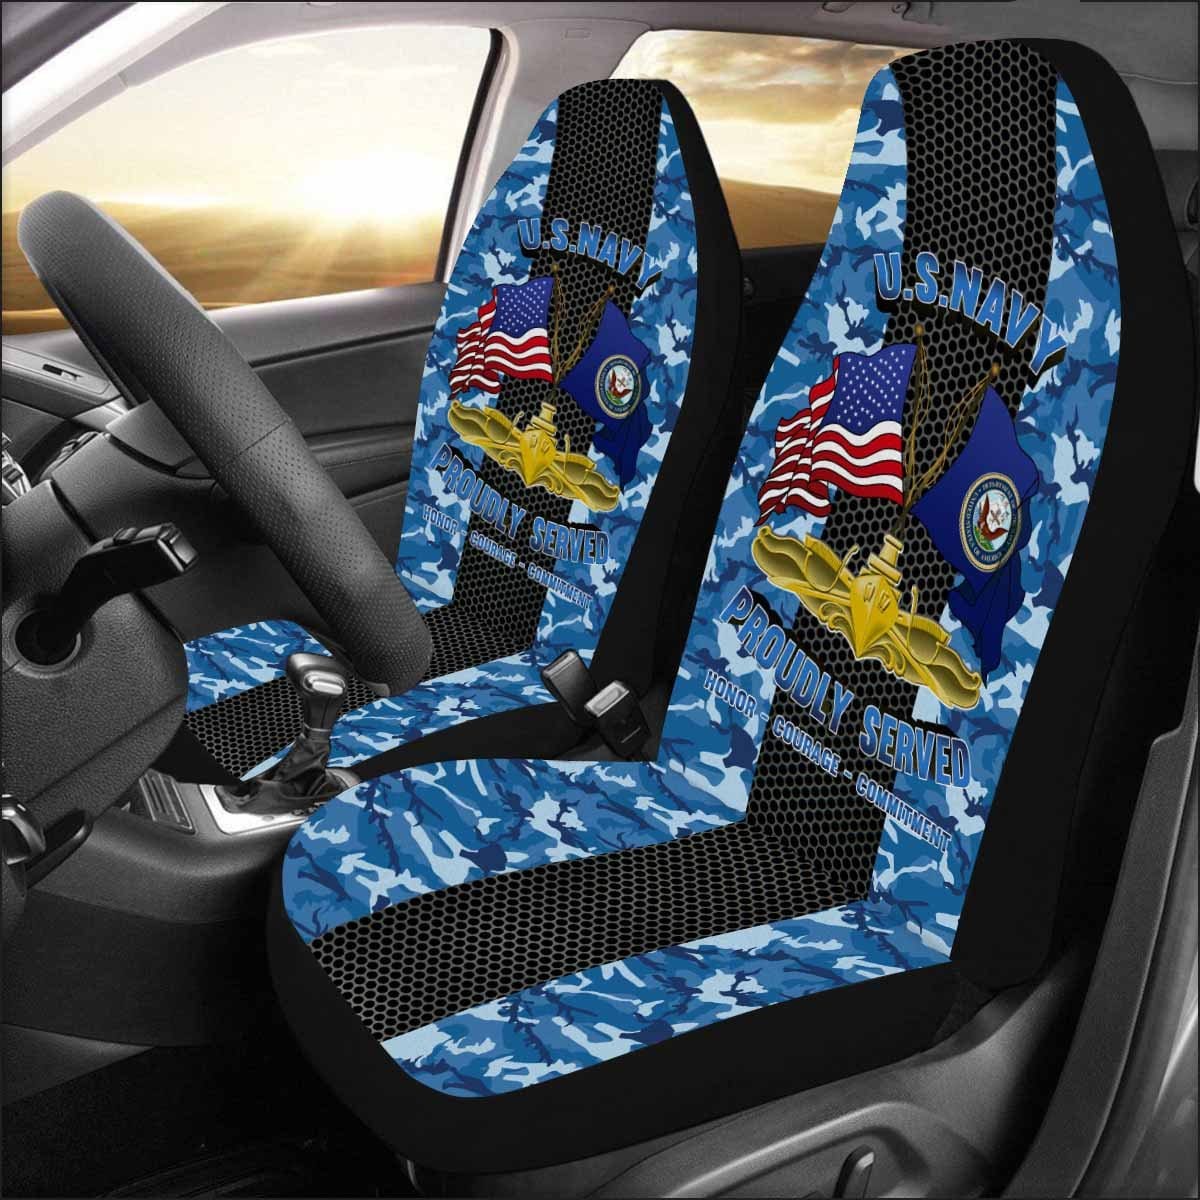 U.S NAVY SURFACE WARFARE Car Seat Covers (Set of 2)-SeatCovers-Navy-Badge-Veterans Nation